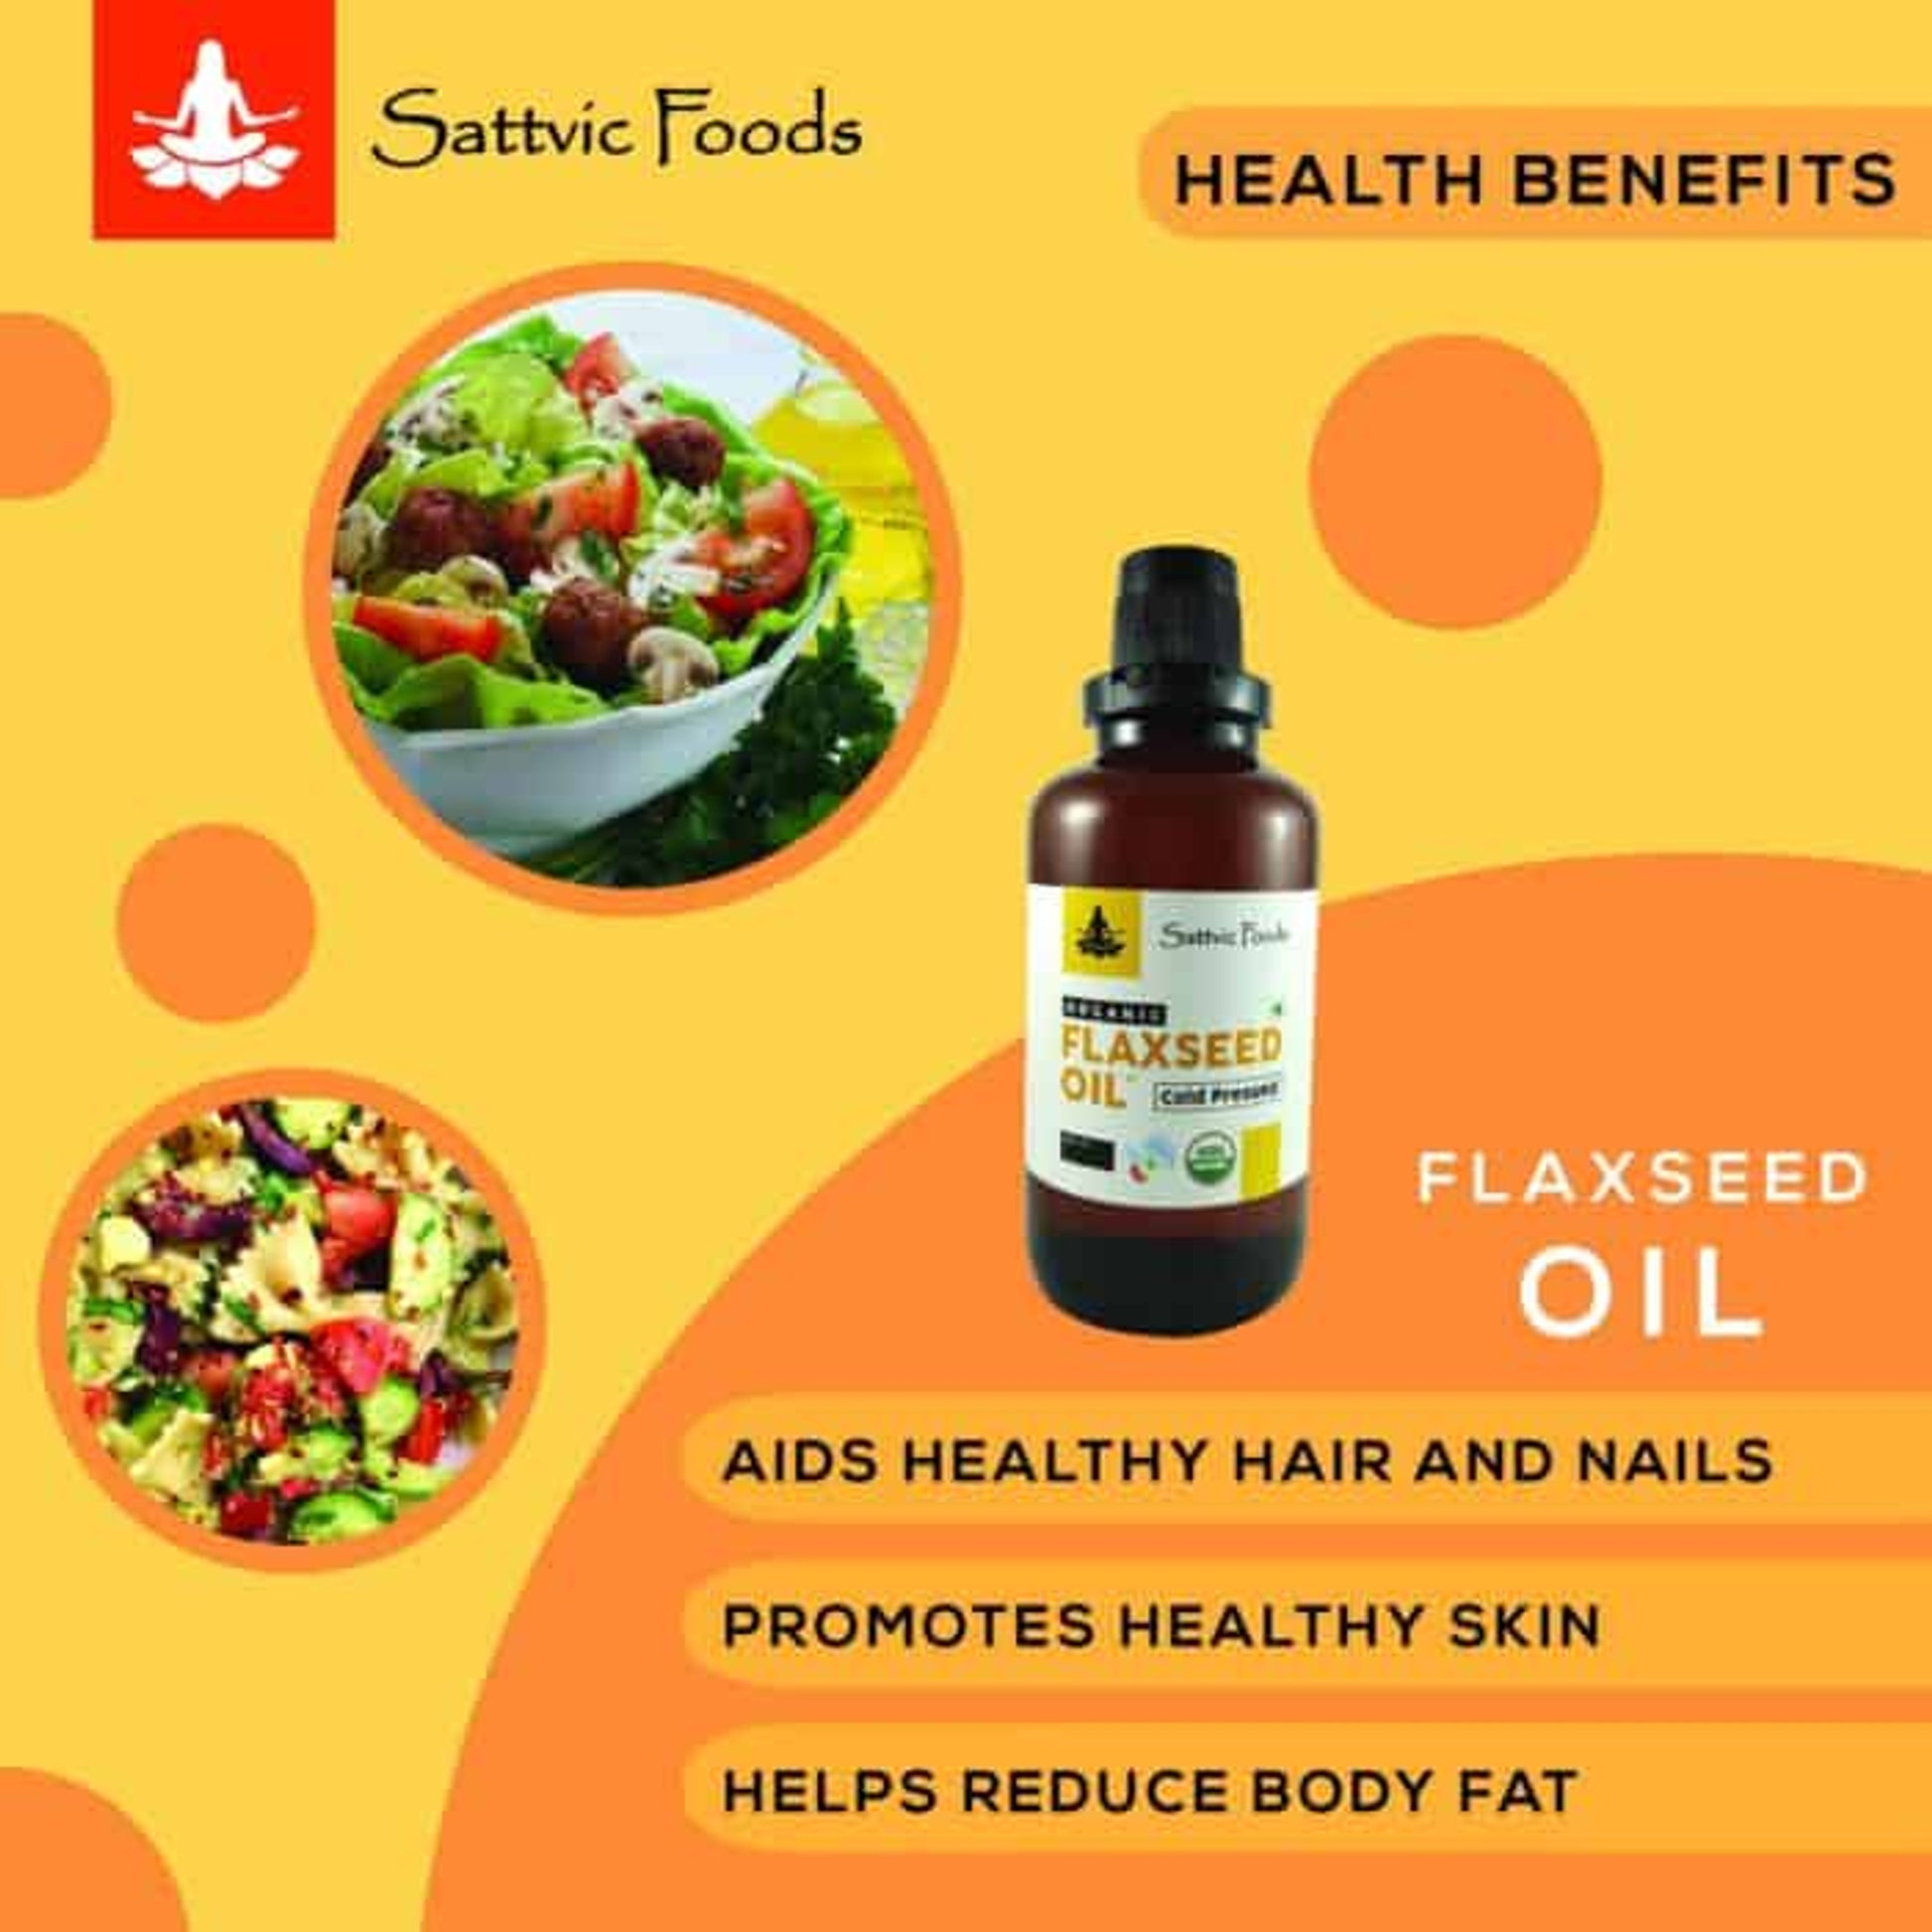 Organic Cold Pressed Flaxseed Oil® (with OMEGA-3) Sattvic Foods